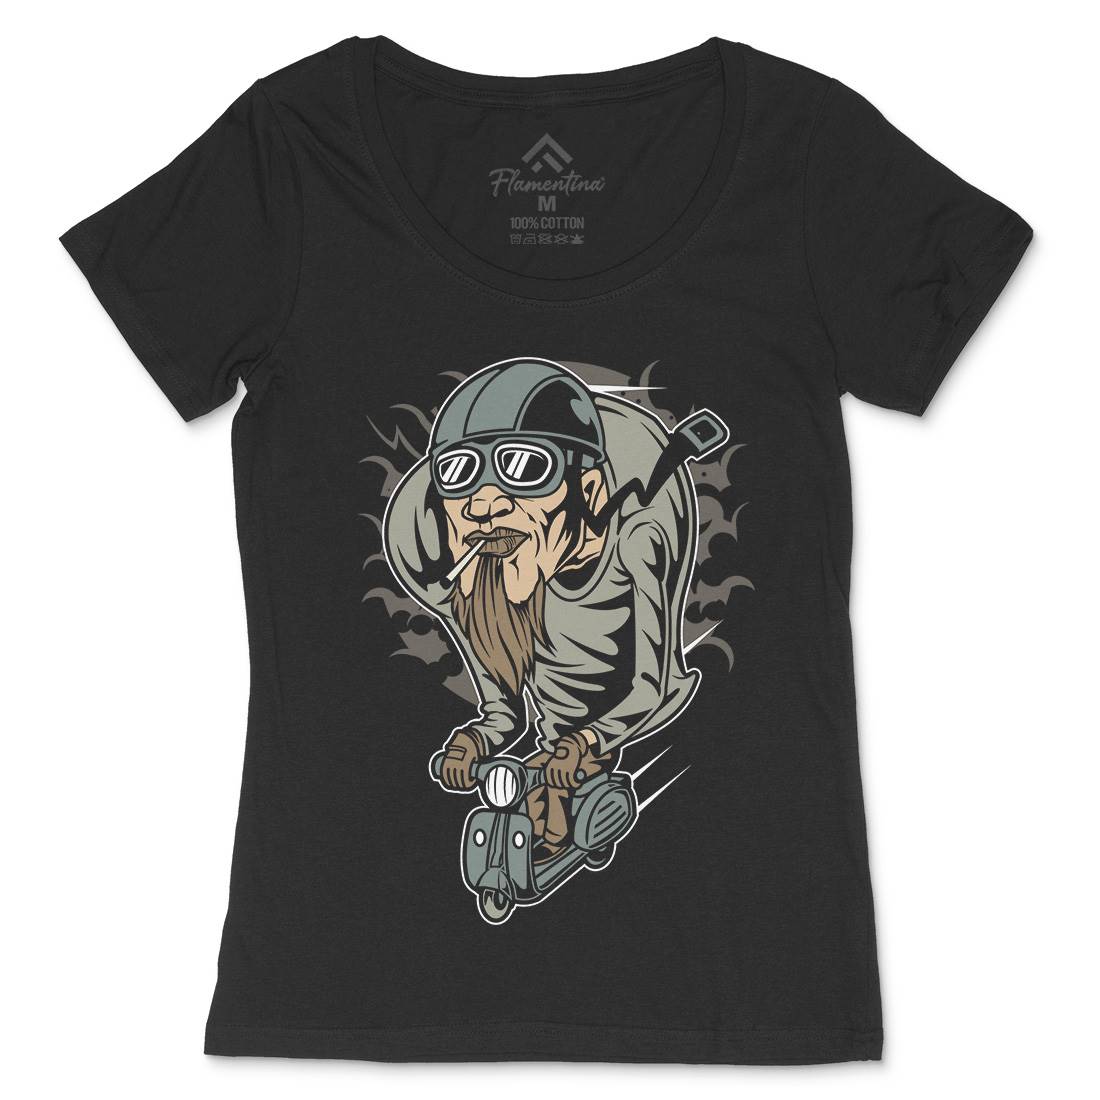 Scooter Man Womens Scoop Neck T-Shirt Motorcycles C437